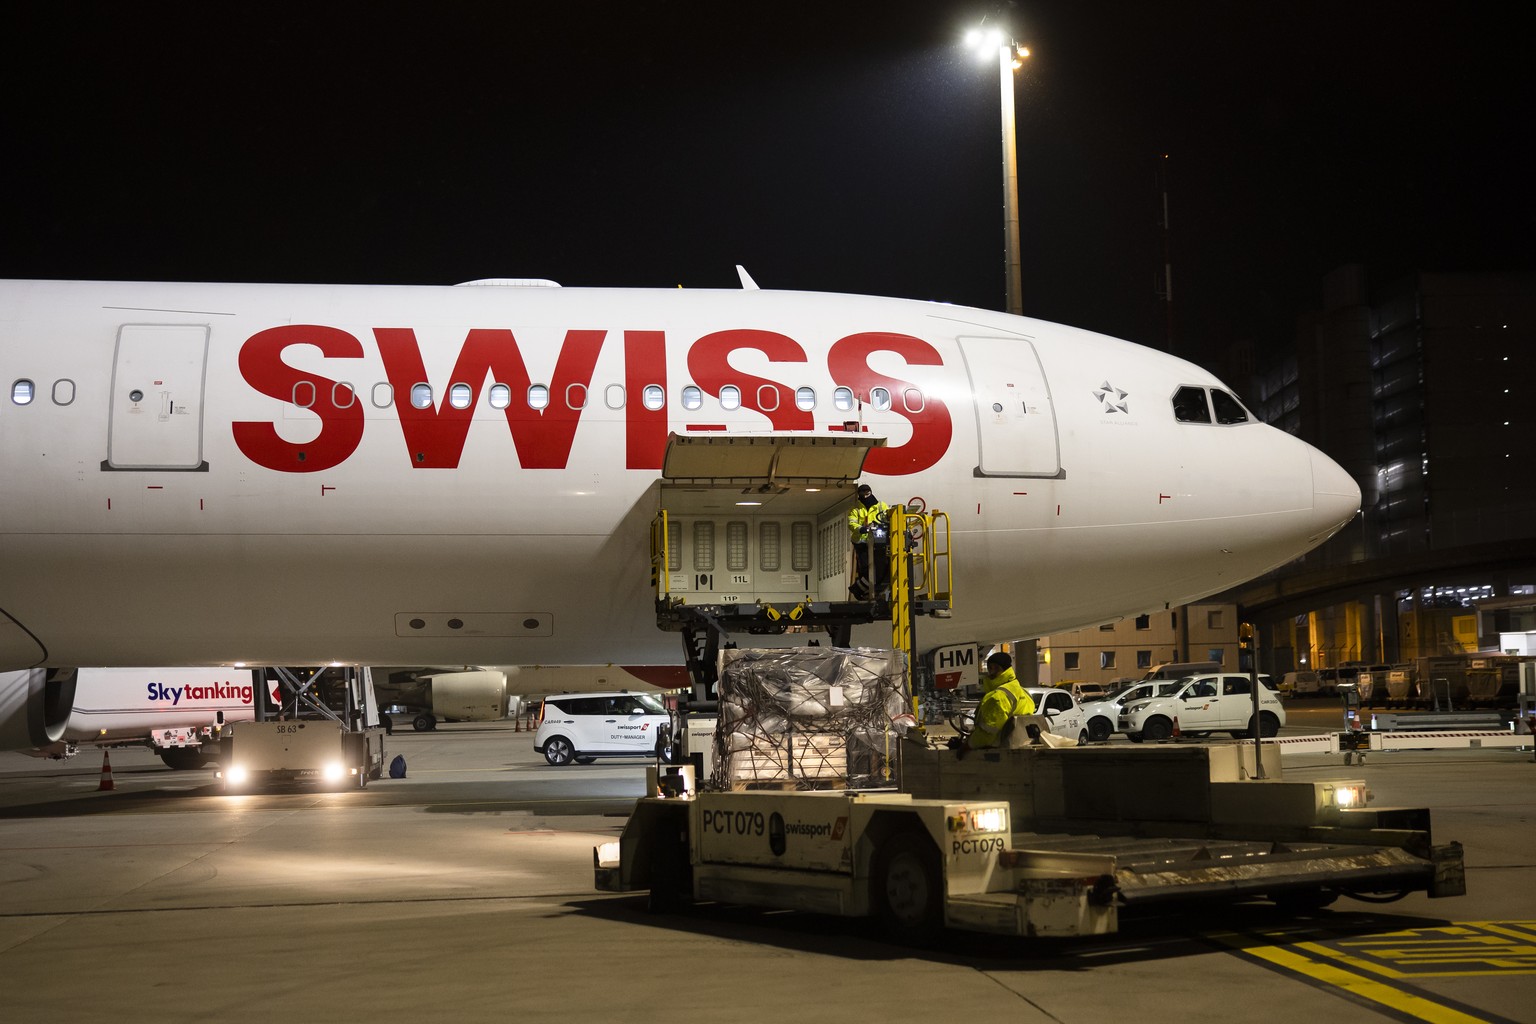 Workers load relief supplies of the Swiss Humanitarian Aid for to the earthquake-hit Turkey onto an airplane at Zurich Airport, on Monday, February 6, 2023 in Zurich, Switzerland. A powerful 7.8 magni ...